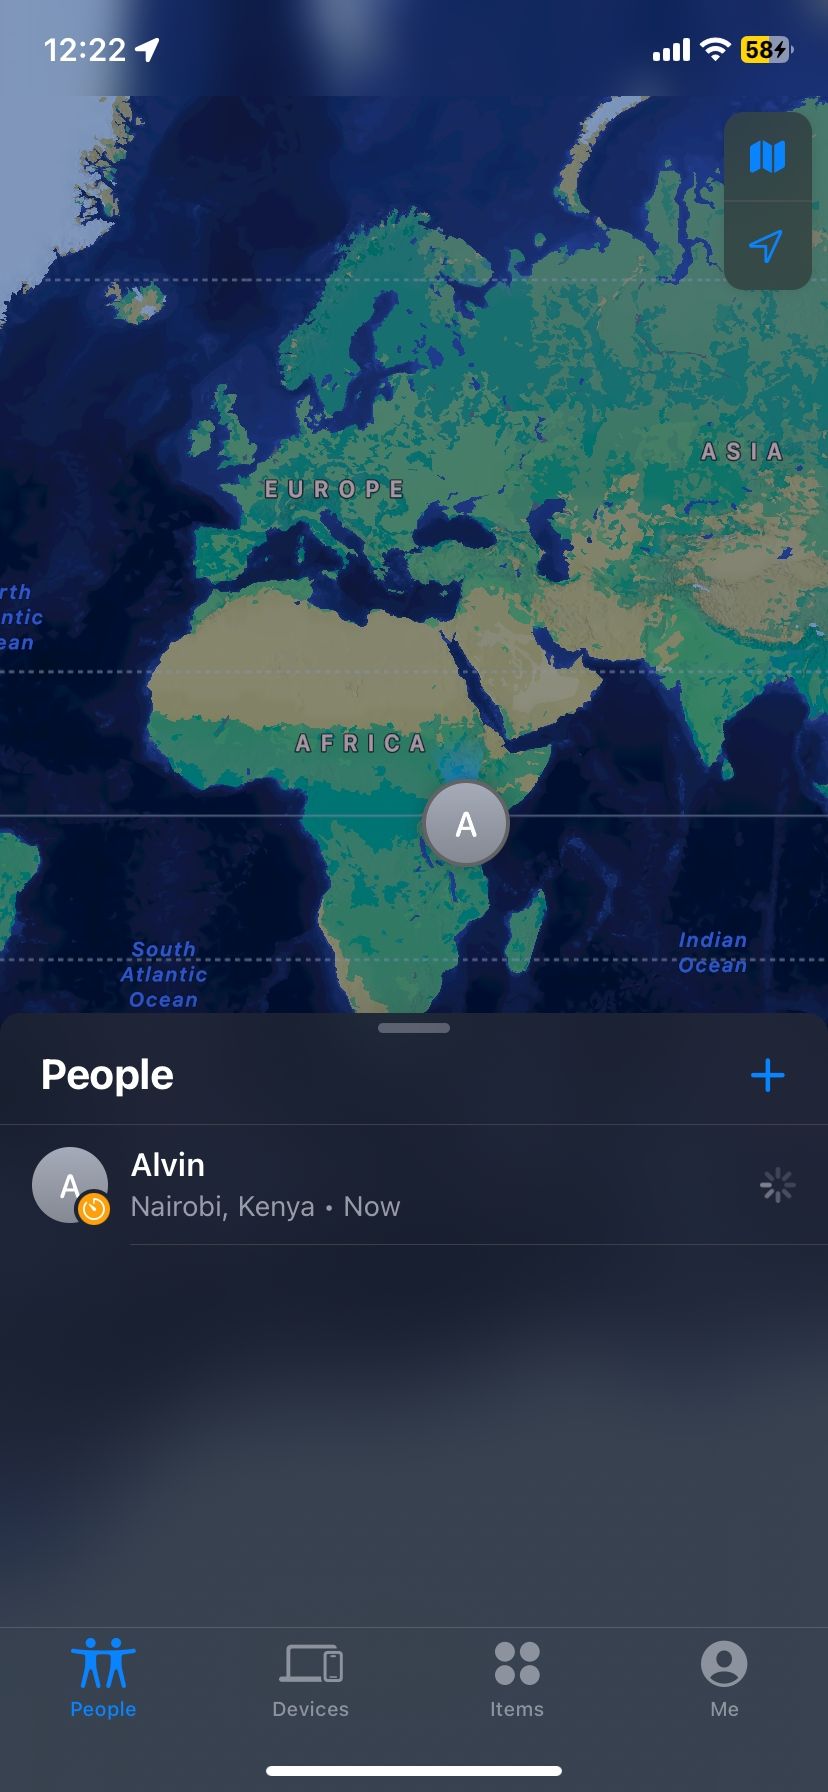 Location sharing active on iPhone